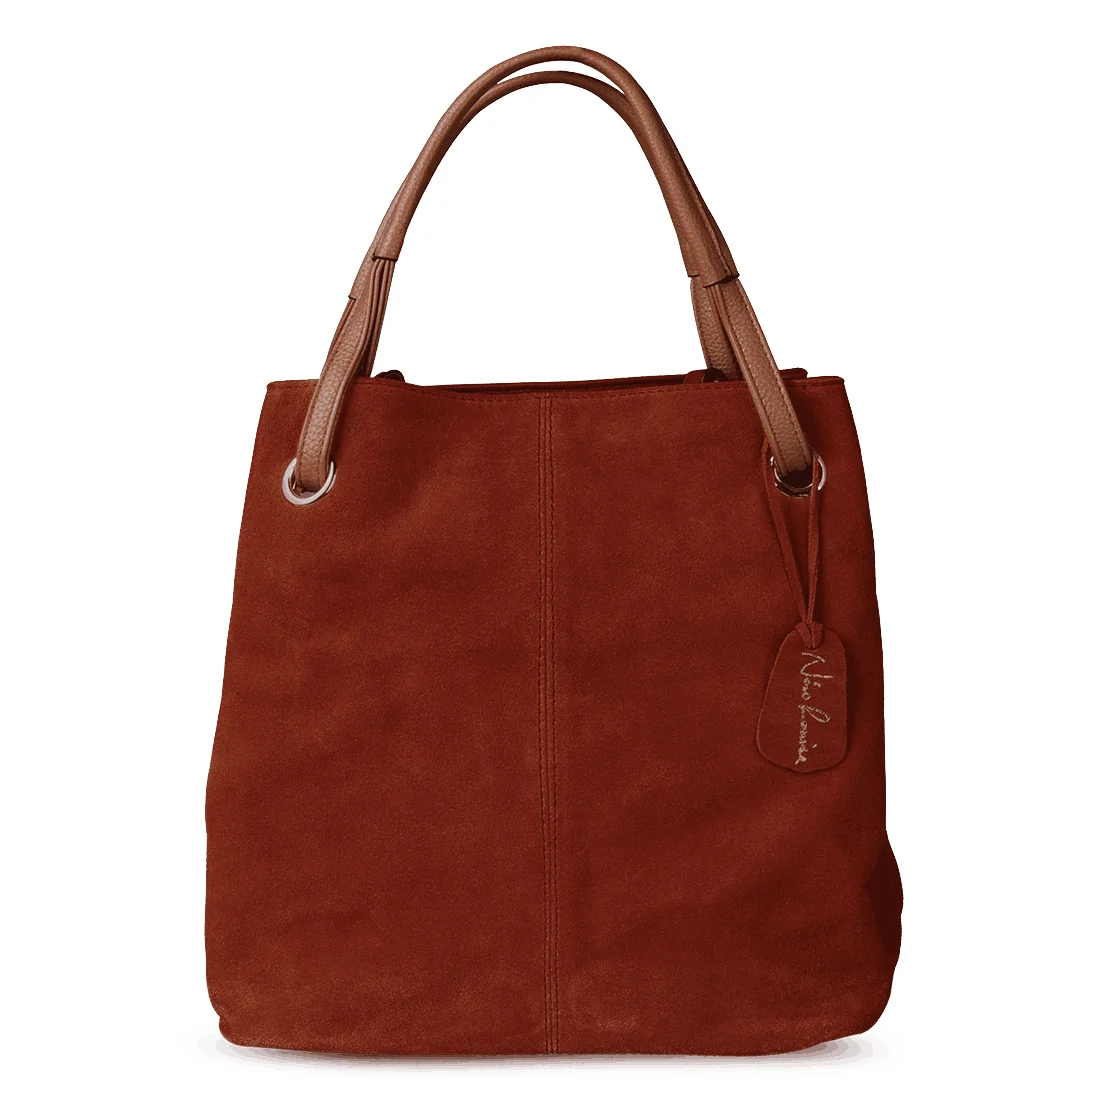 Nico Louise Women Real Split Suede Leather Tote Bag,New Leisure Large Top-handle Bags Lady Casual Crossbody Shoulder Handbag - Color: Light Brown